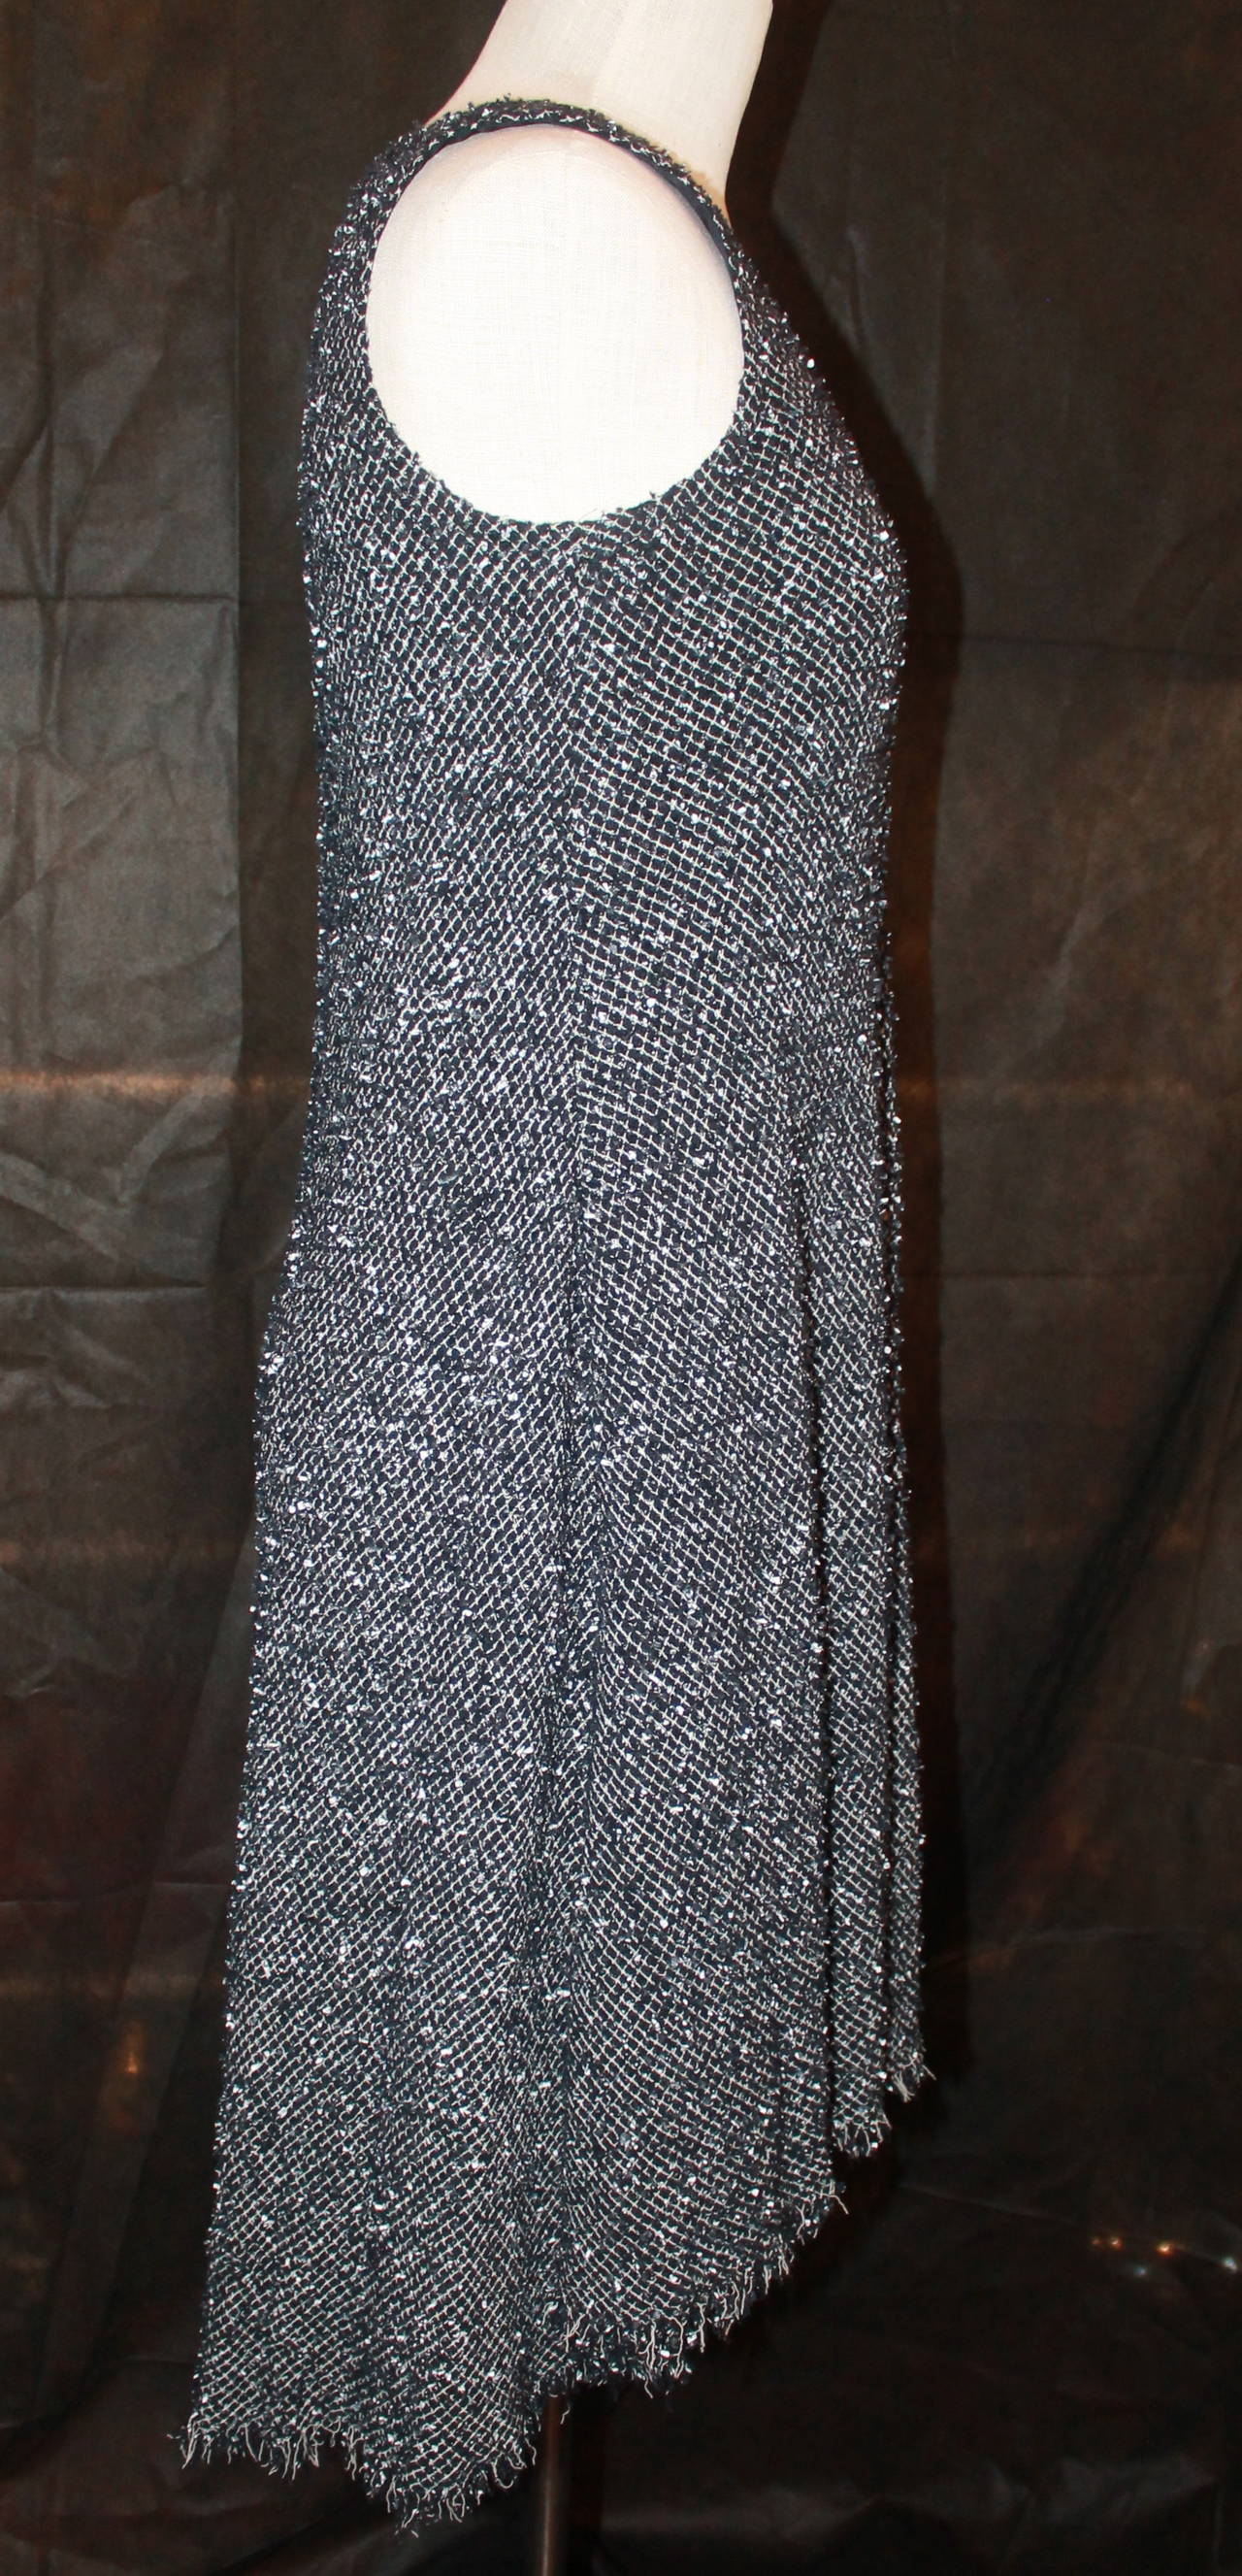 Chanel Black & White Tweed High-Low Dress - 38. This dress is in excellent condition and has a shift style. It also has a camellia button accent in the back.

Measurements:
Bust- 29